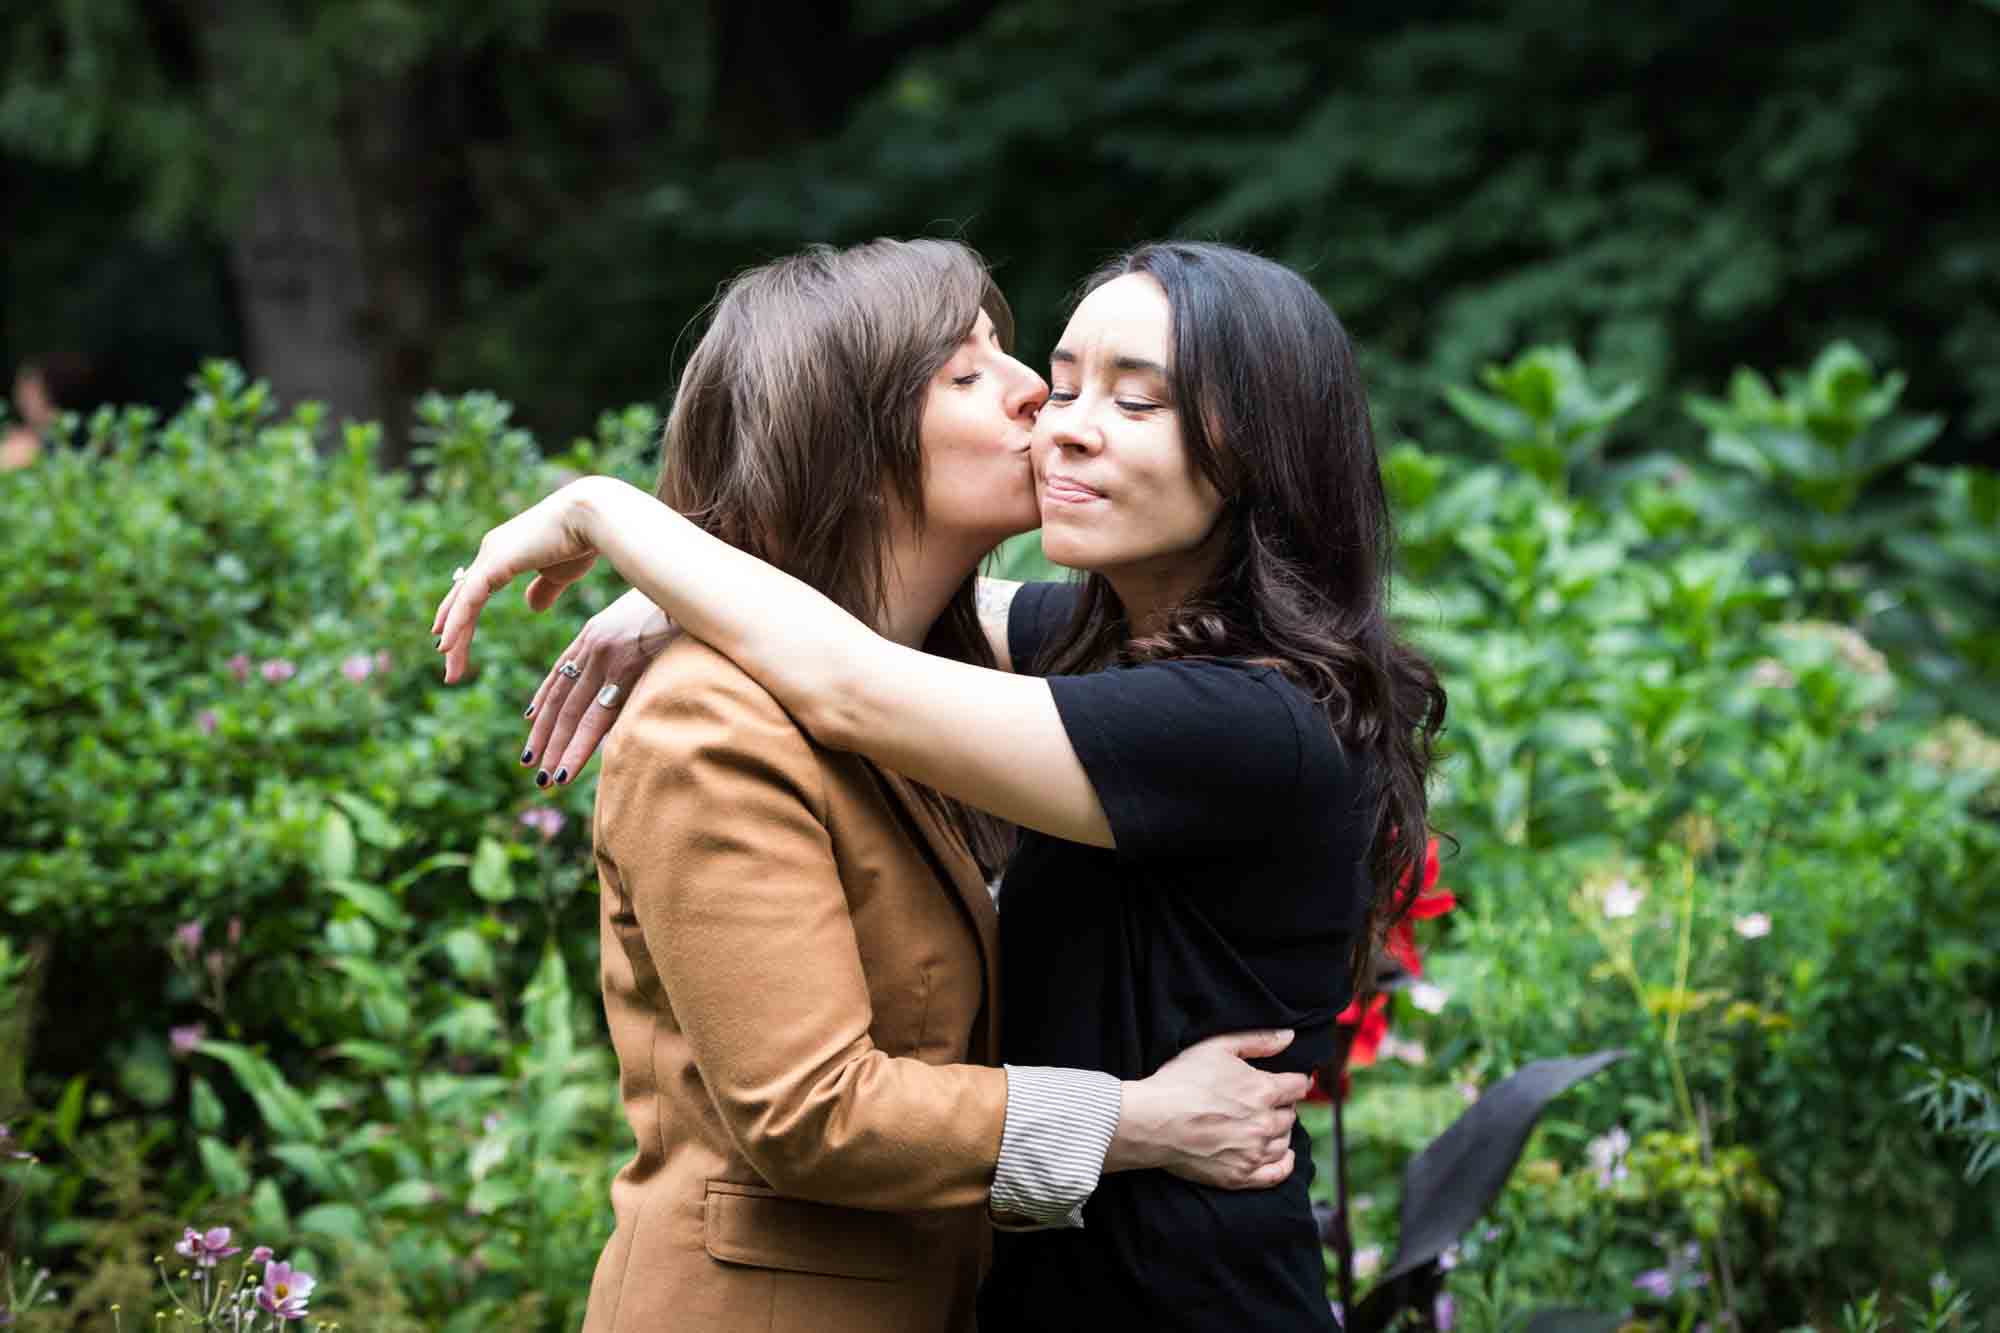 Two women kissing in Riverside Park surrounded by green foliage for an article on how to produce a movie-themed surprise proposal